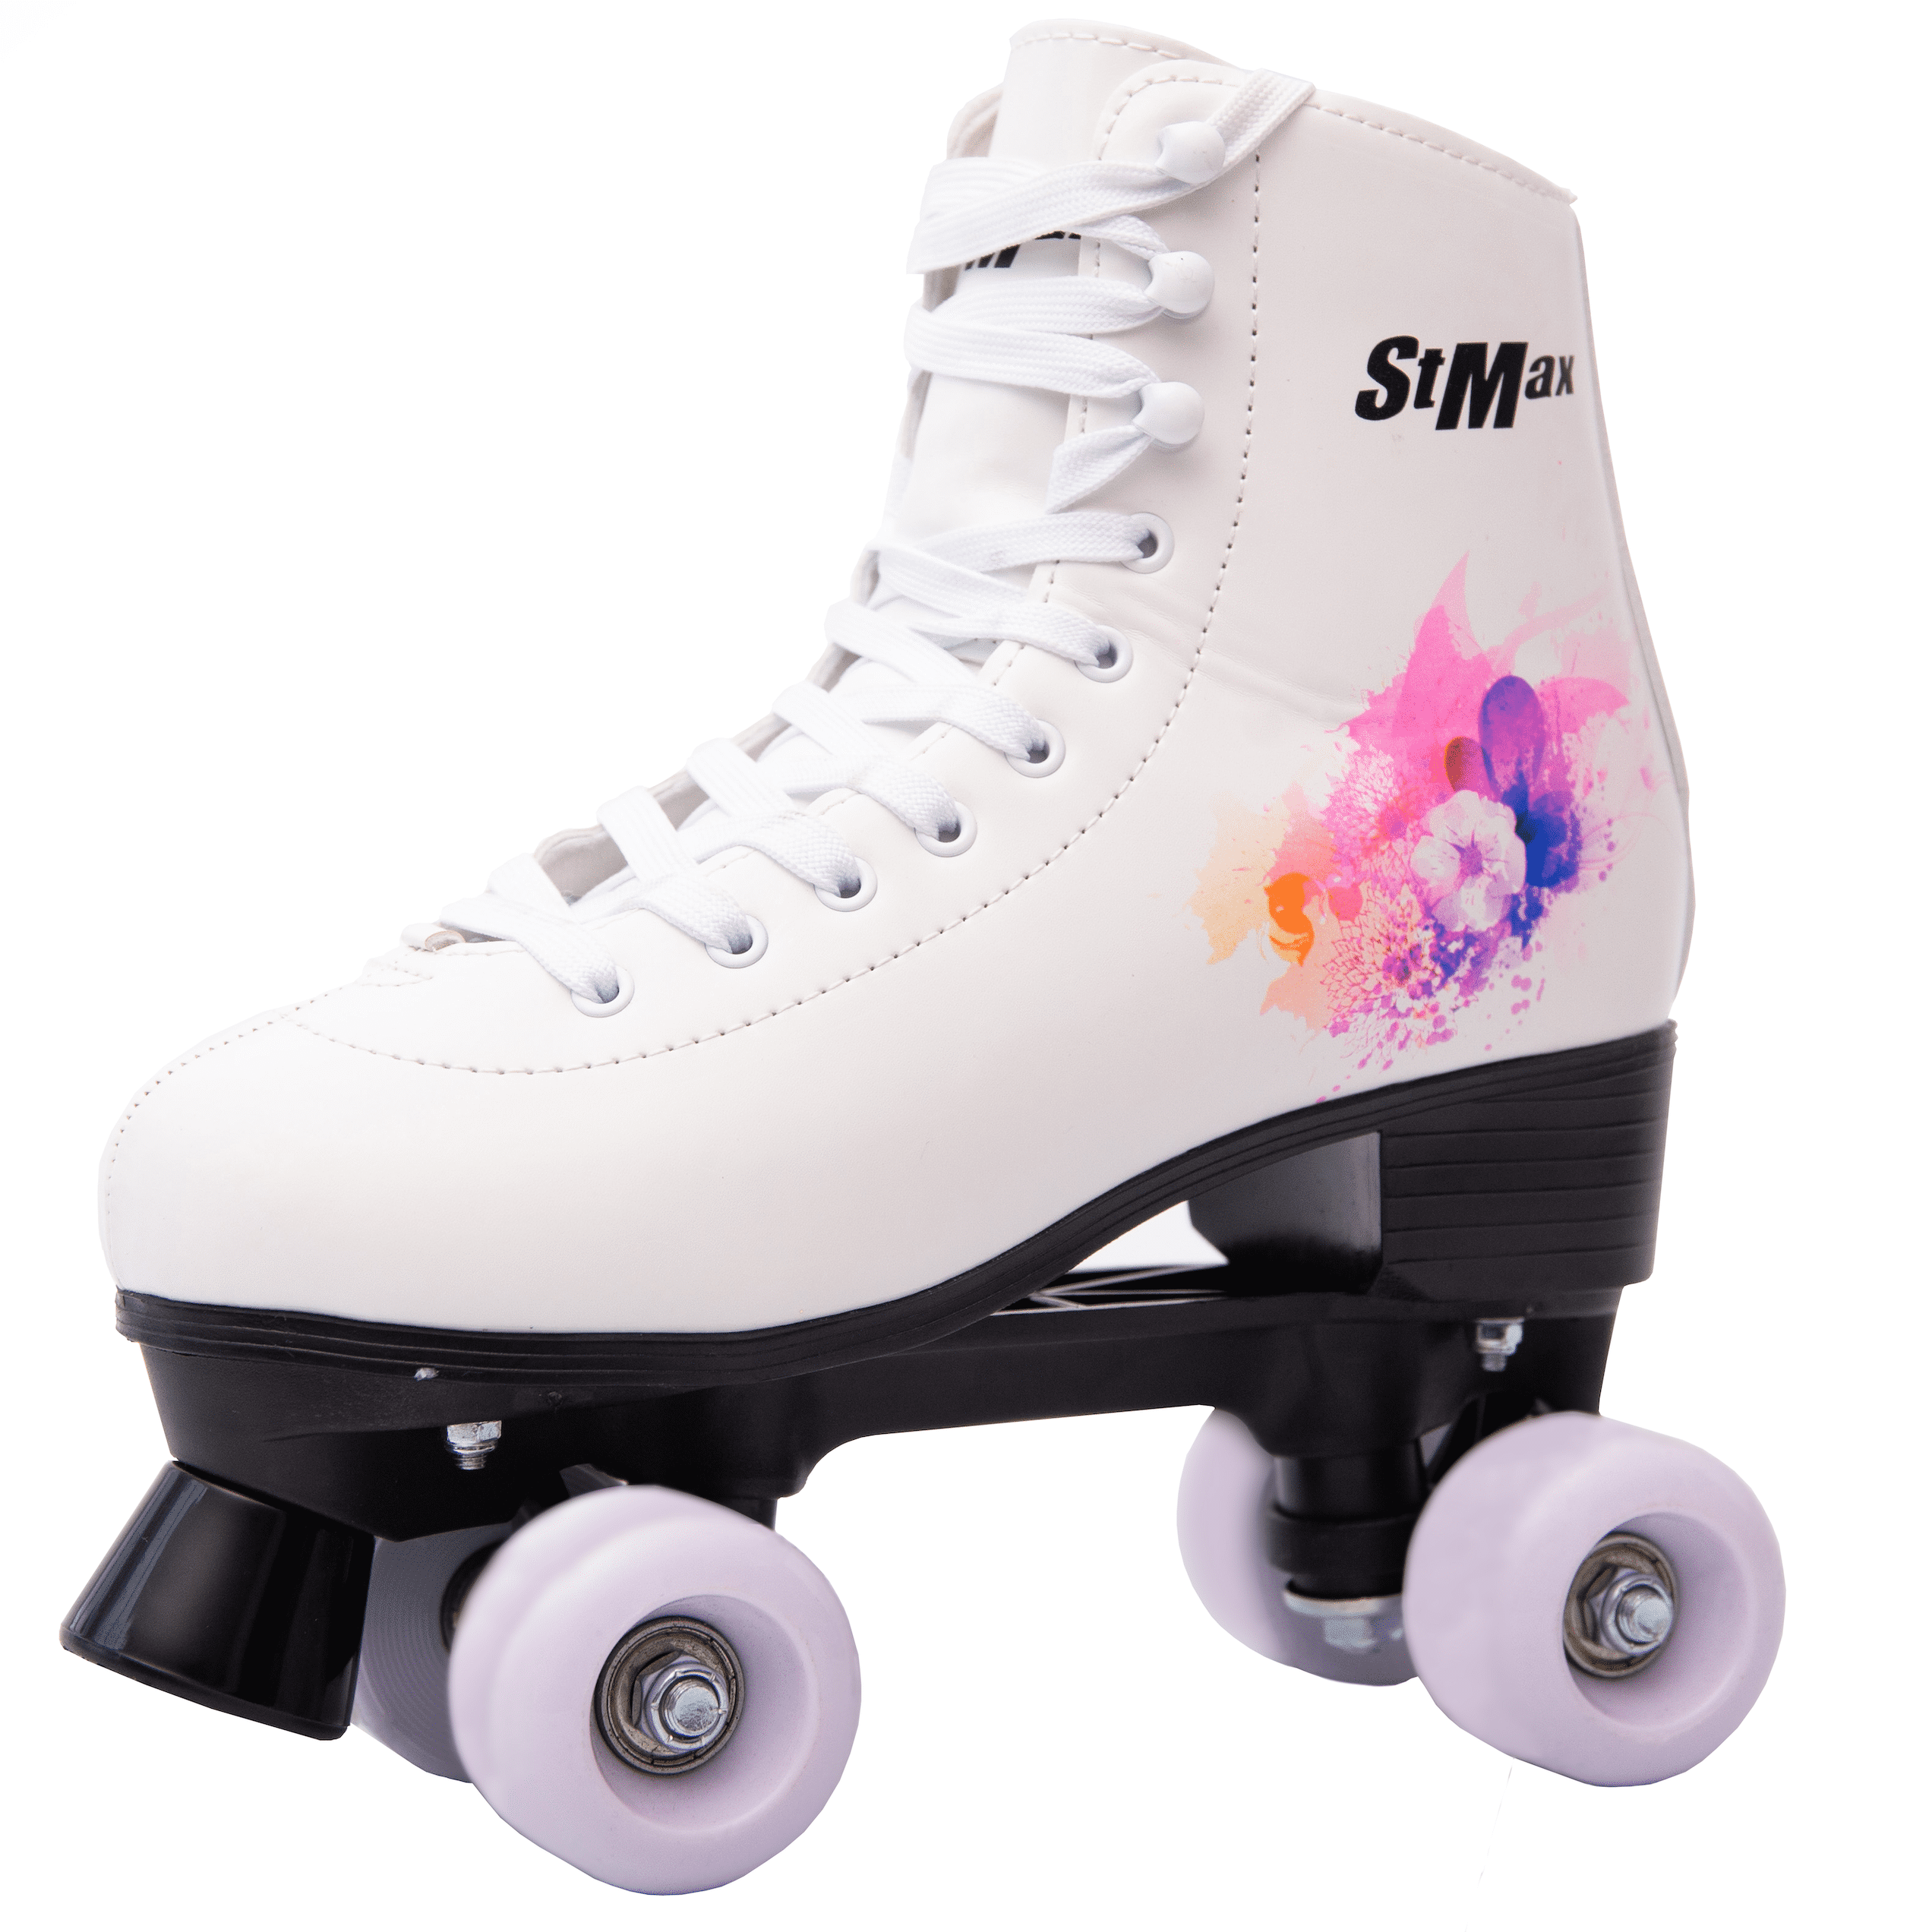 Quad Roller Skates for Girls and Women Size 2.5 Youth Pink Flower Outdoor Derby 